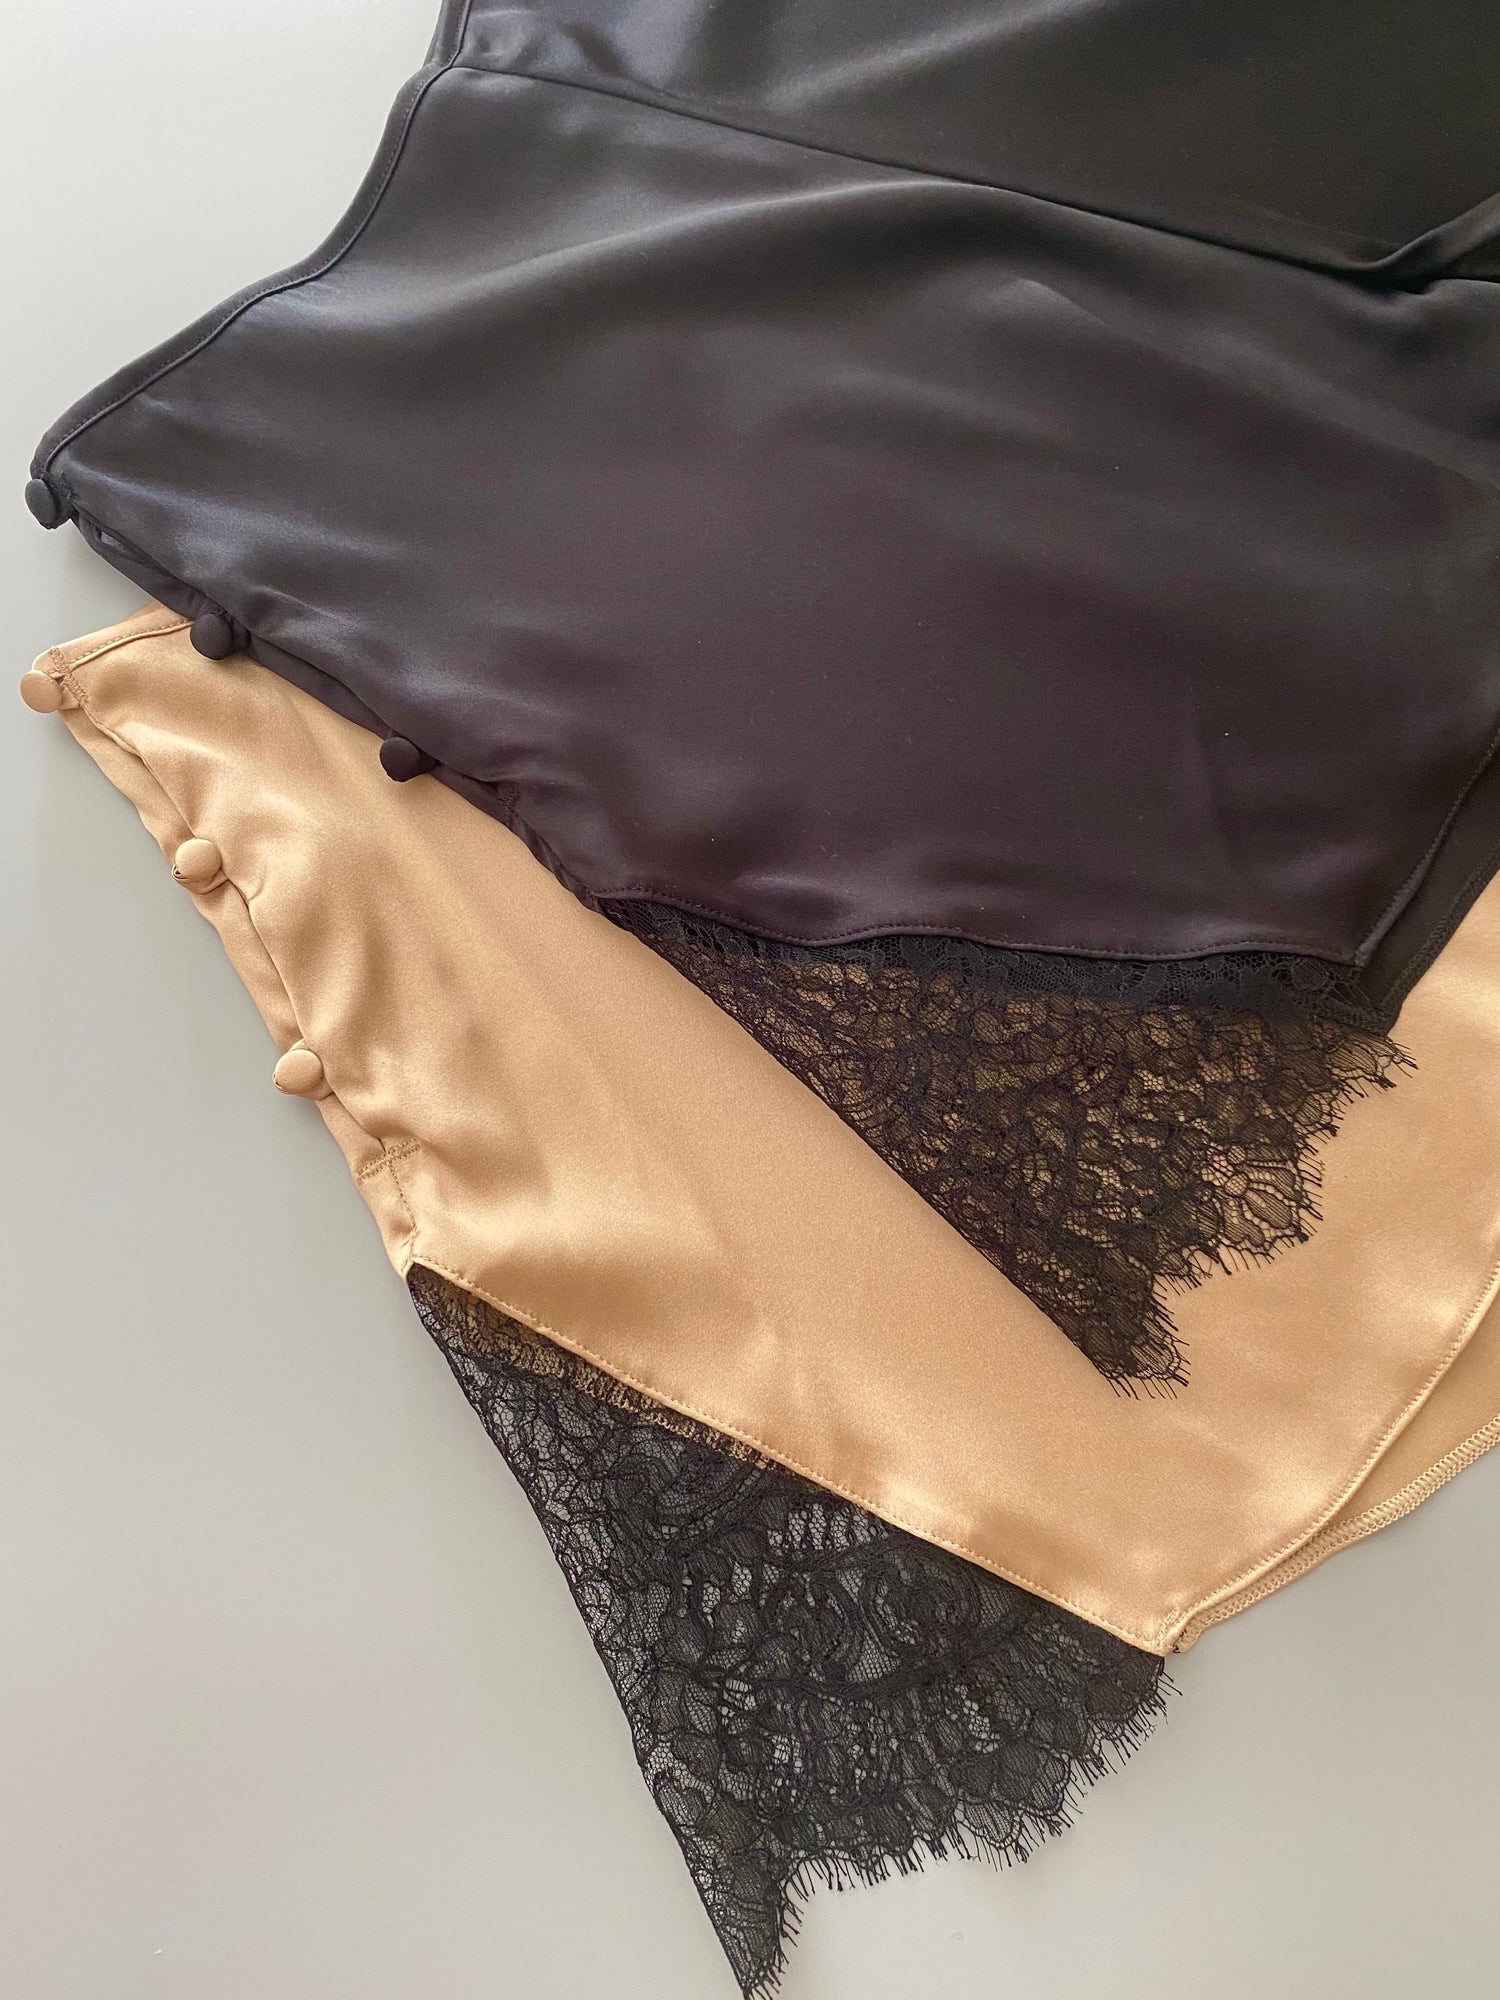 Silk satin french knickers in black and cream silk with black lace